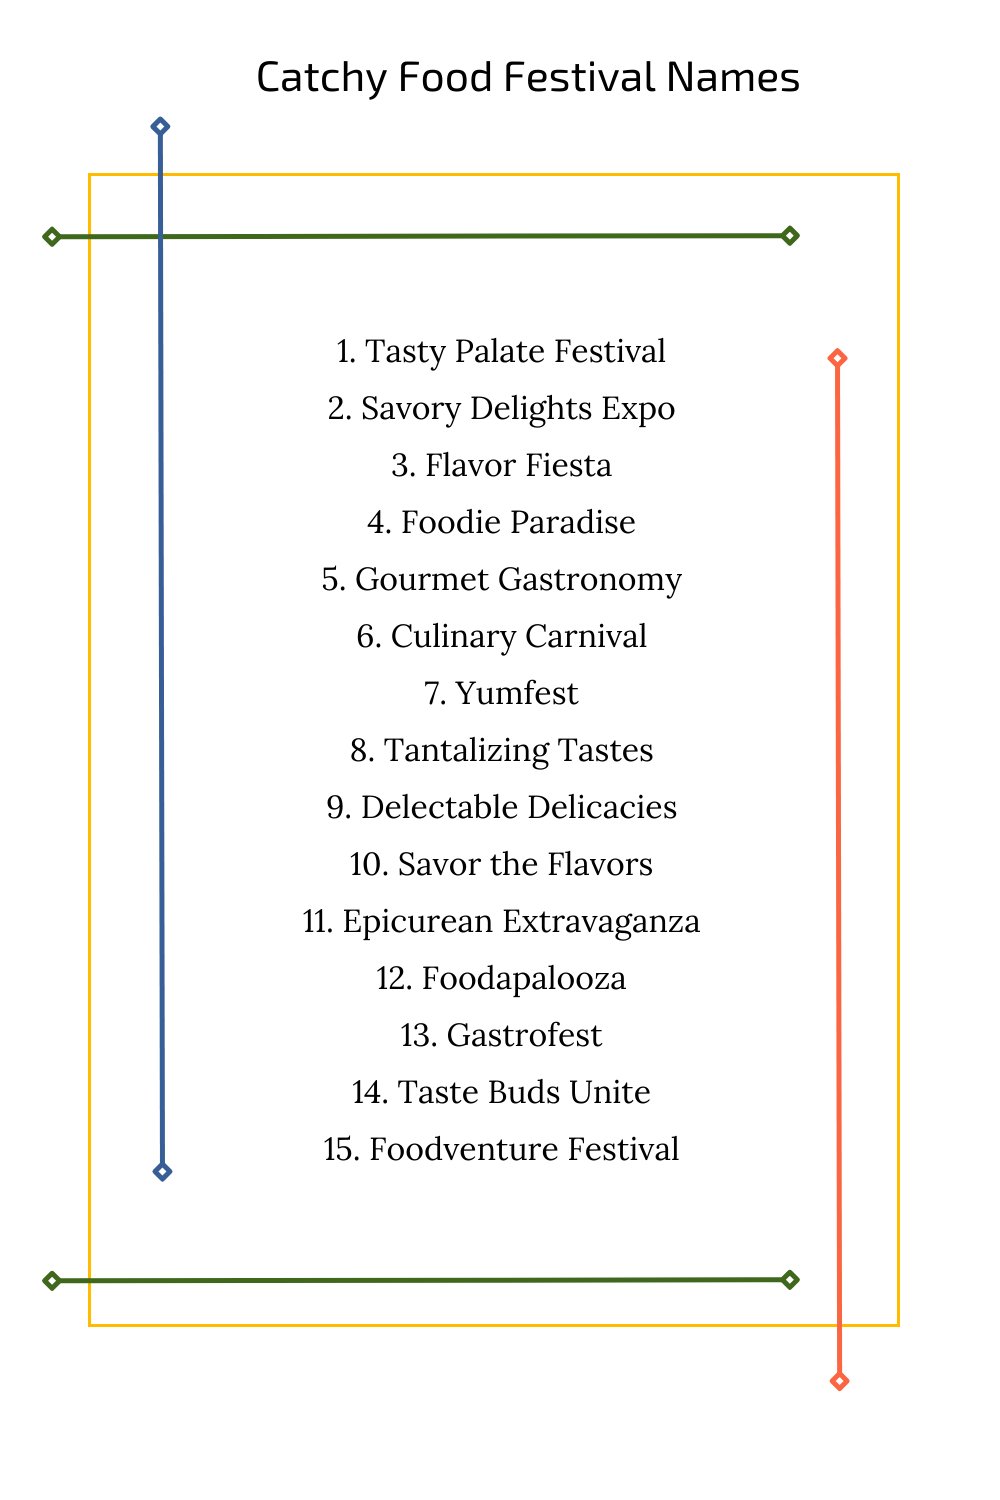 Catchy Food Festival Names